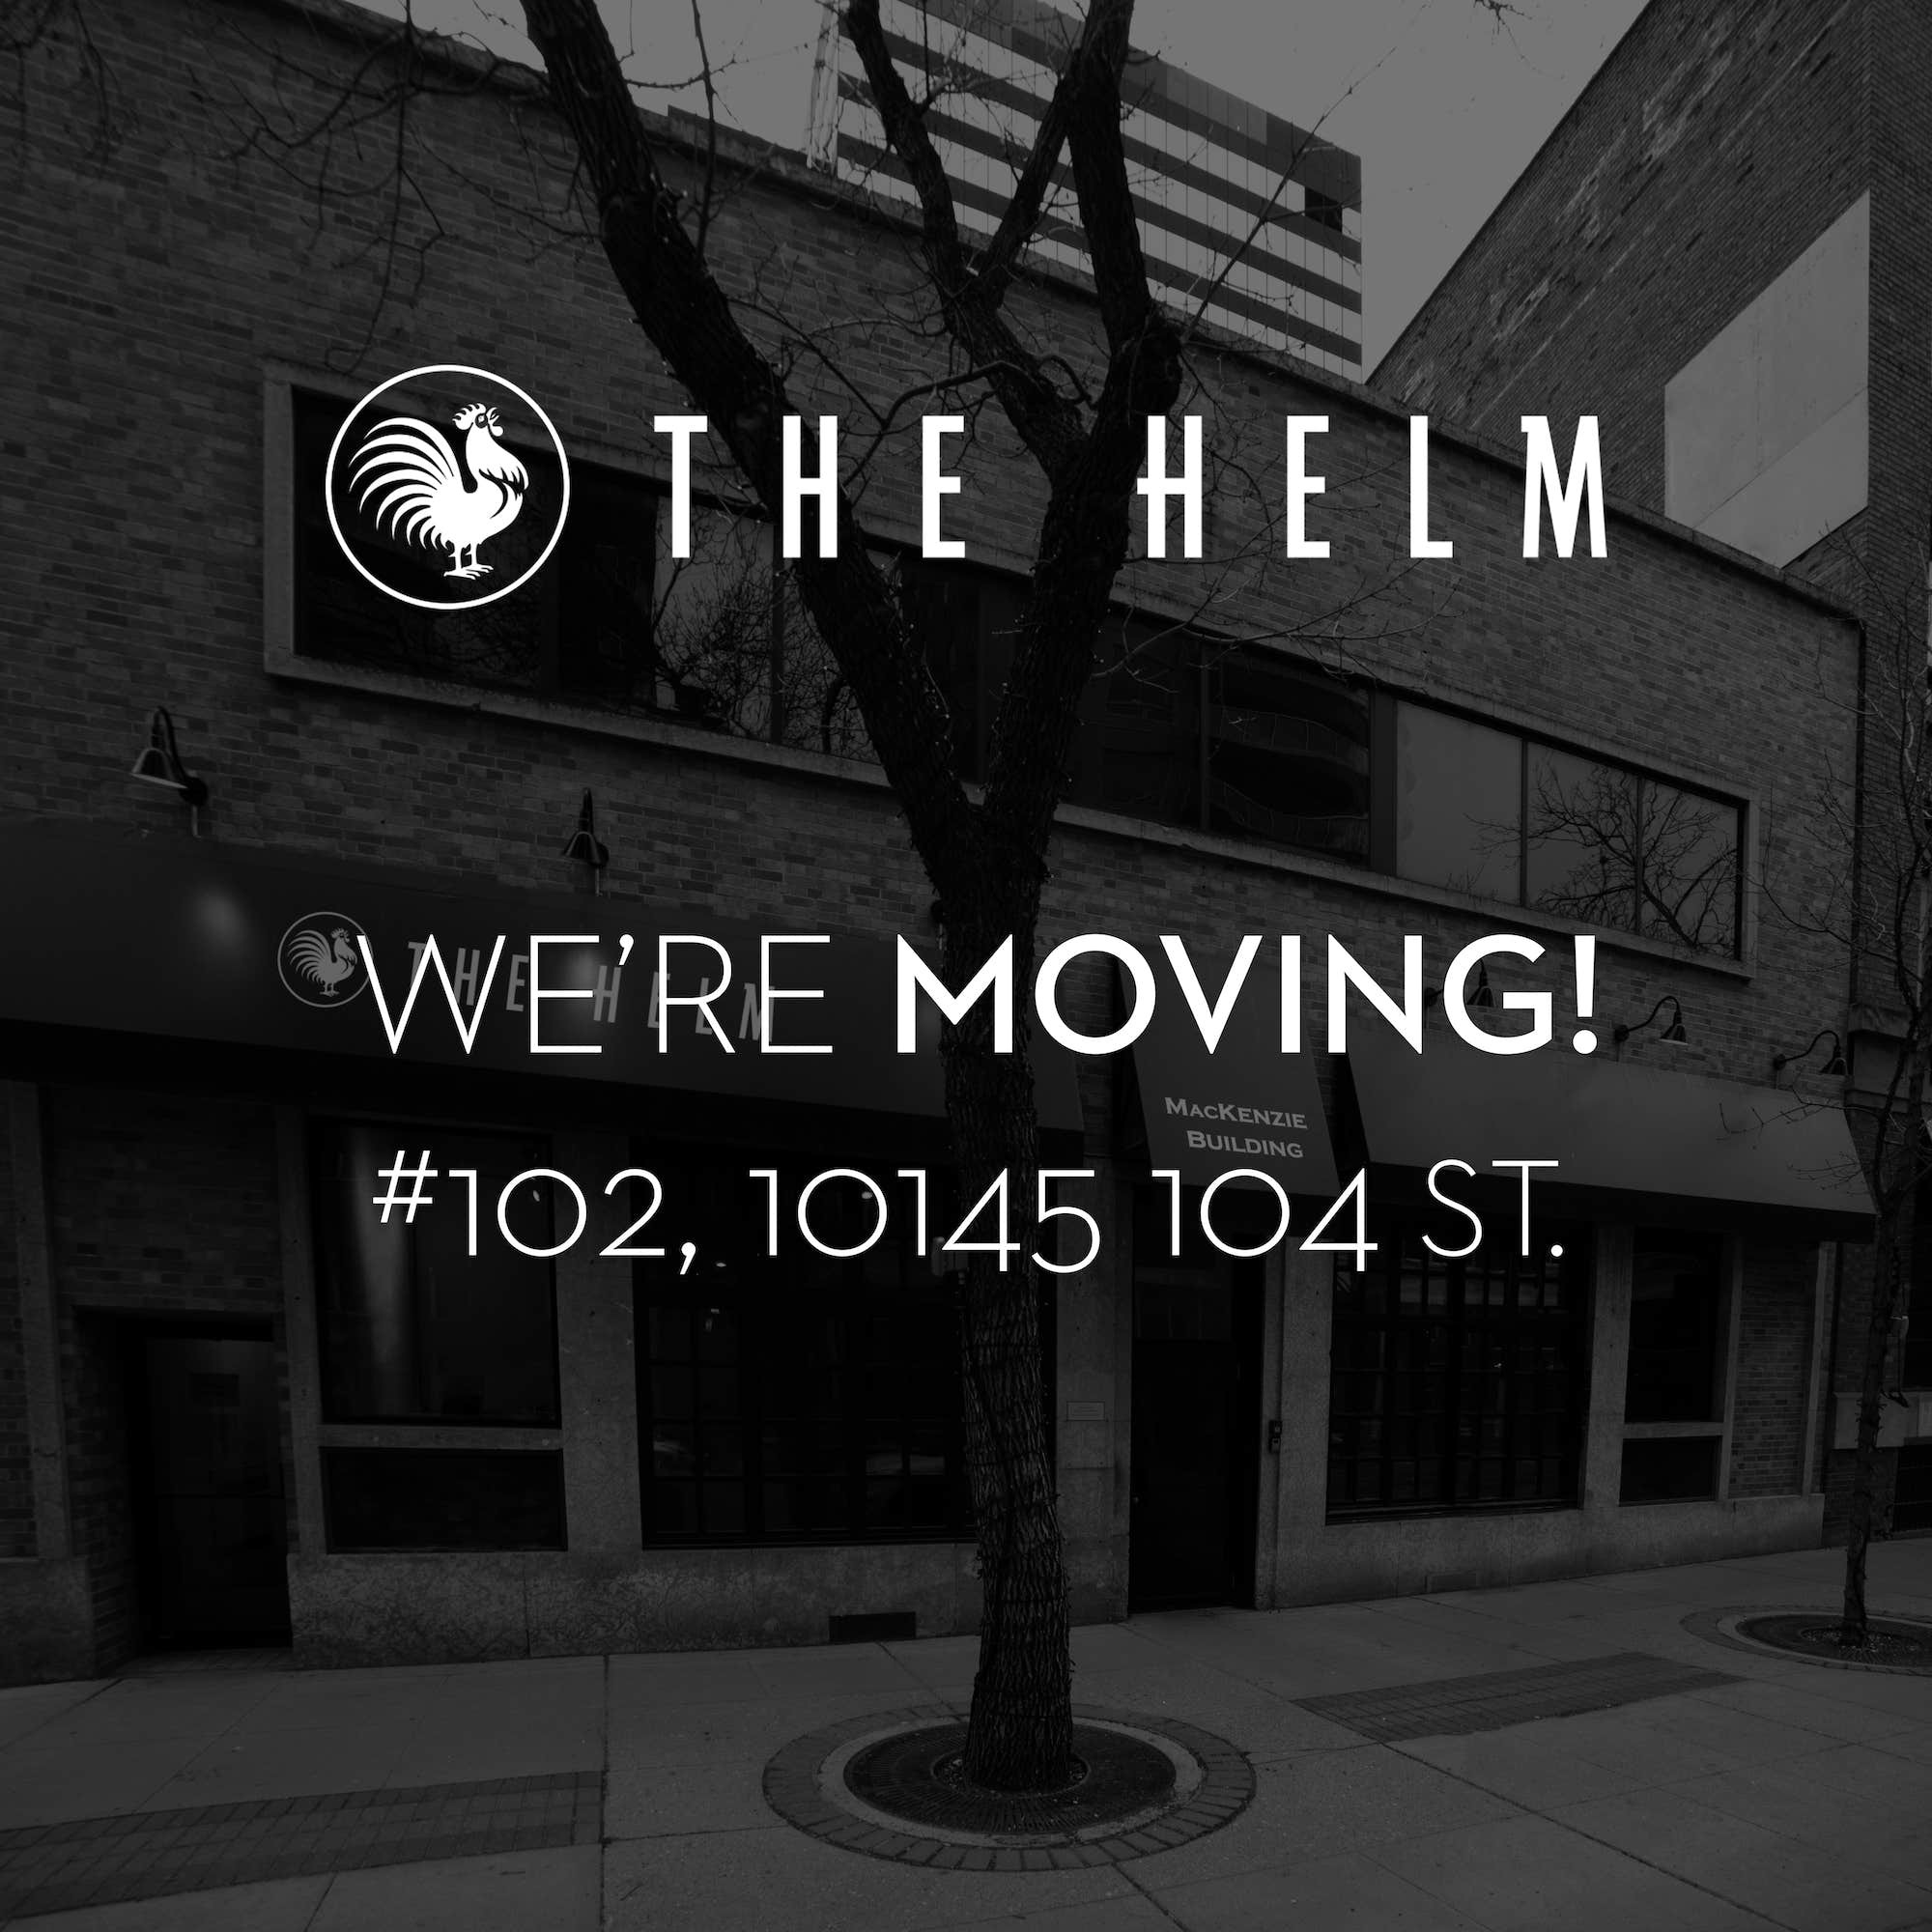 The Helm is Moving! Visit us in our new home down the street on May 22